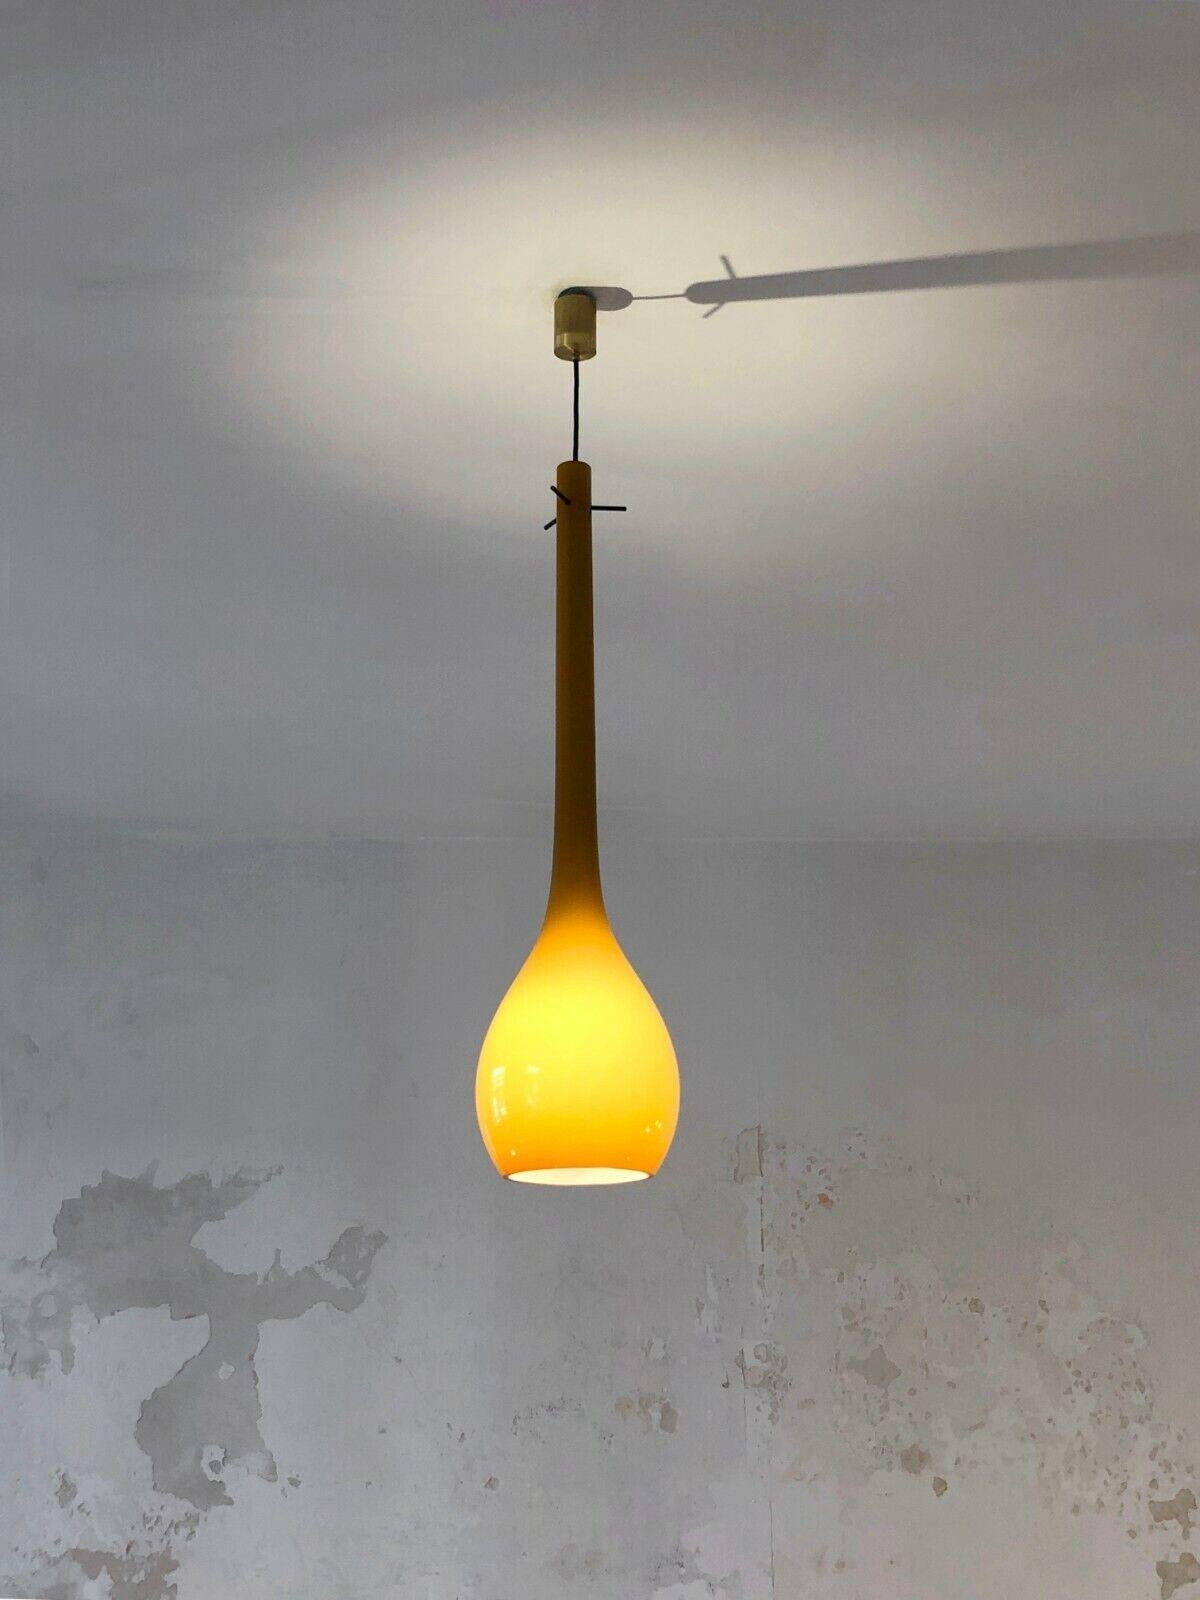 An exceptional long drop pendant light, Modernist, Free Form, Shabby-Chic, with a very fine design, in yellow ocher Murano glass fixed by 2 patinated brass cylinders, to be attributed, Murano, Italy 1960.

DIMENSIONS:
Height of glass alone: 80